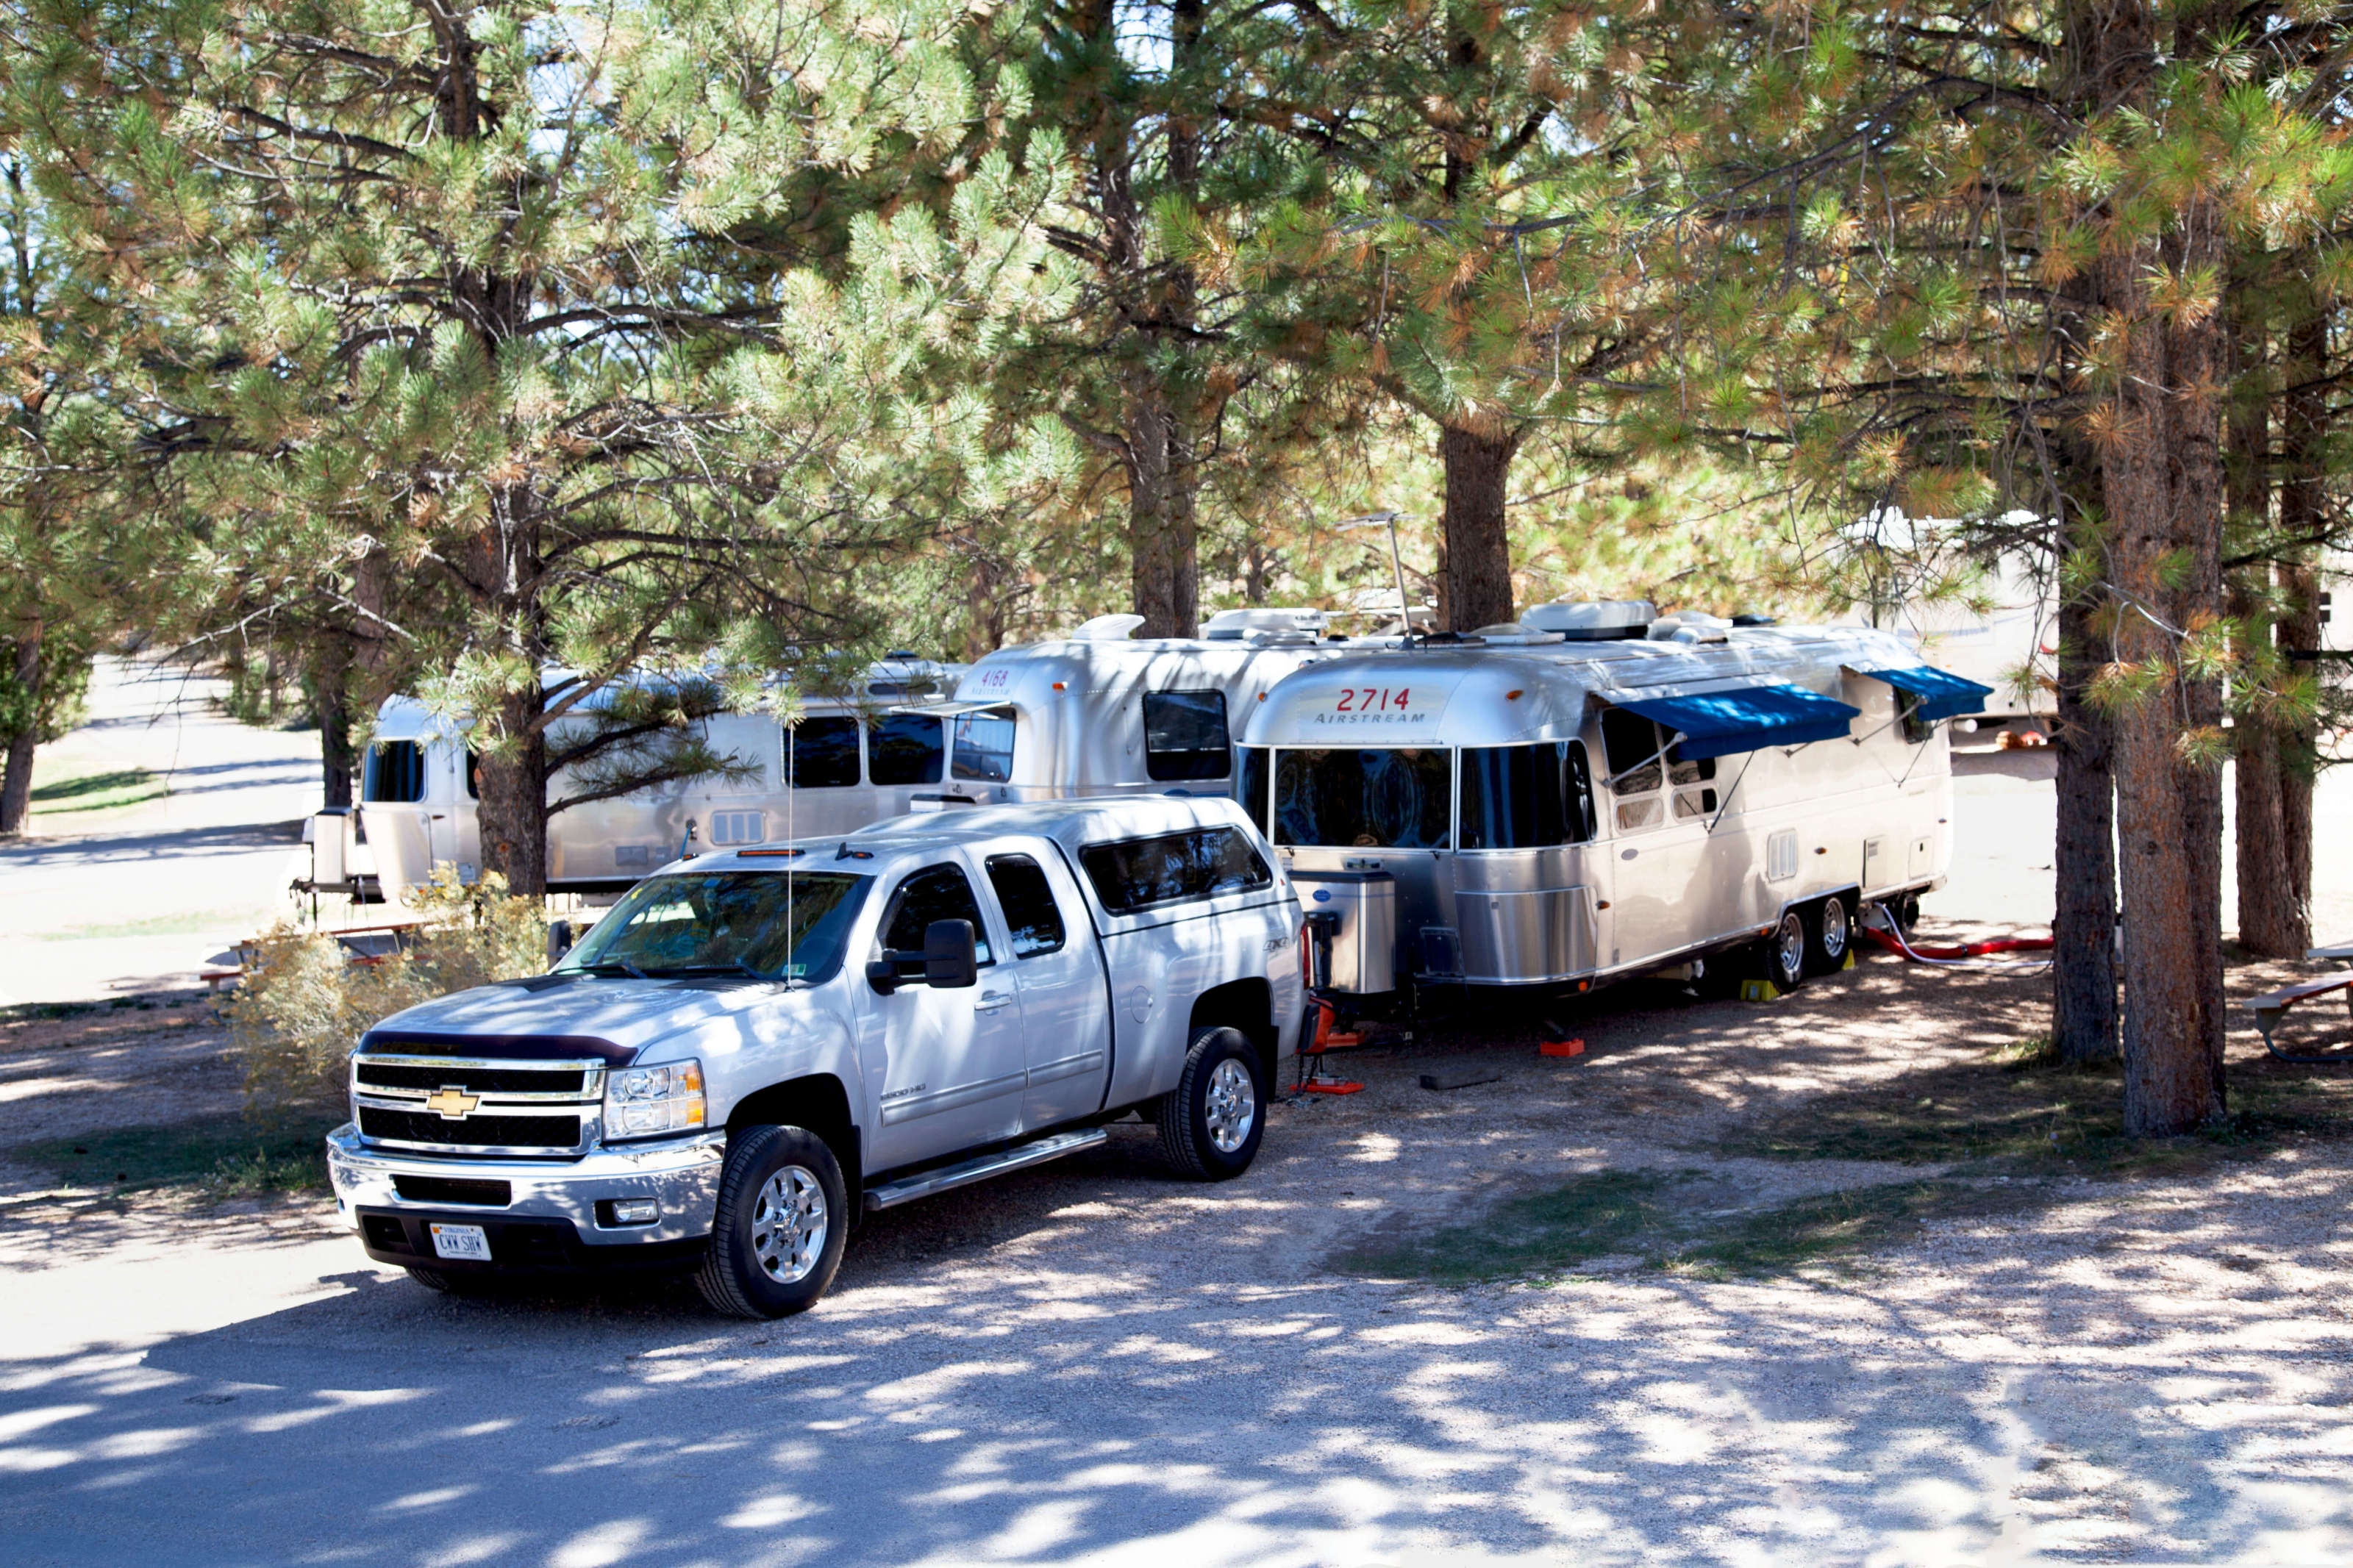 Truck hitched to airstream in shady campsite.